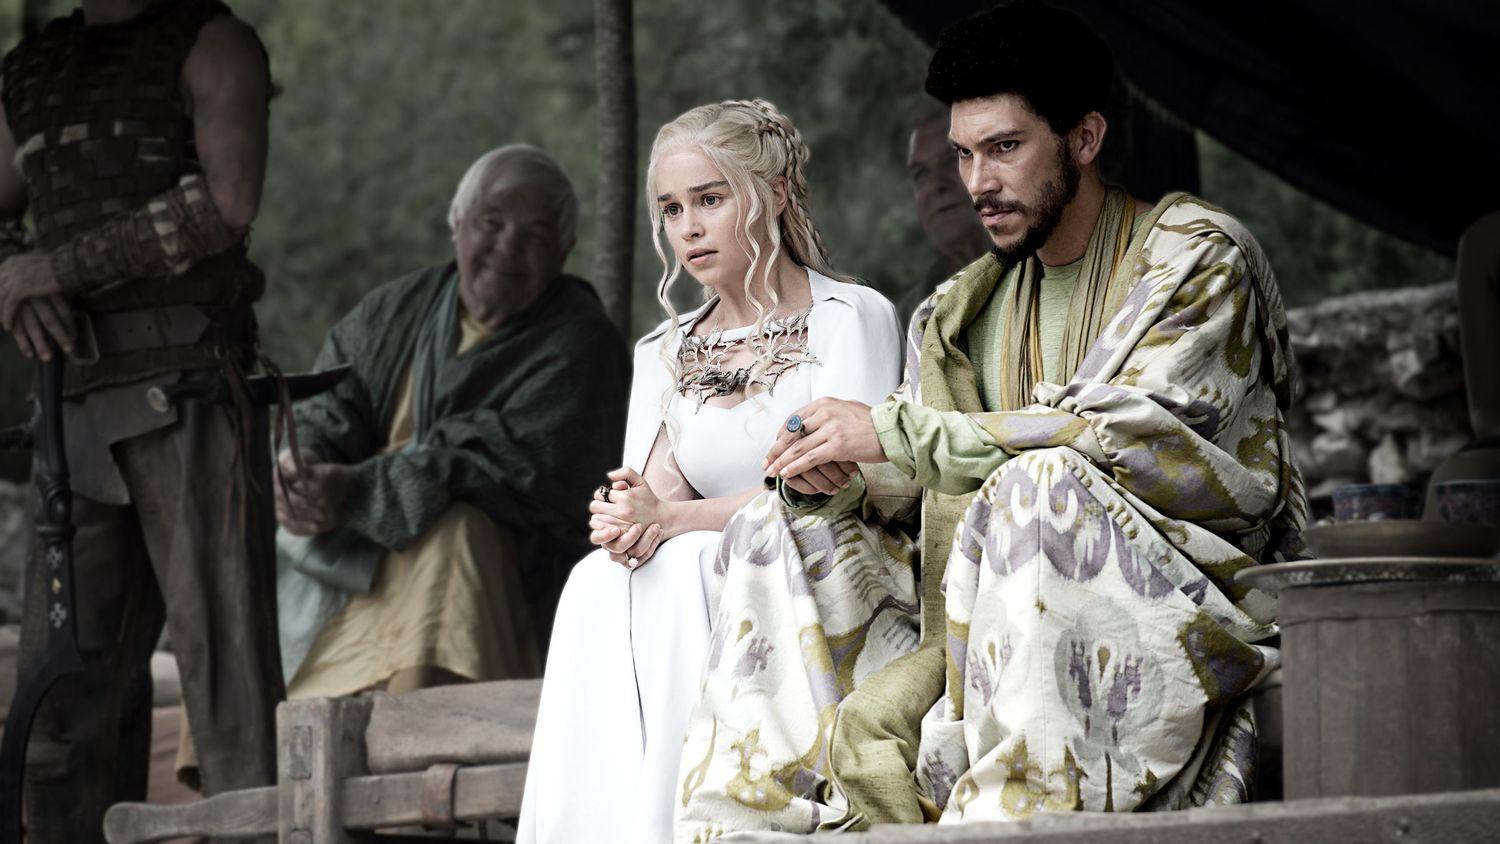 [Review] - Game Of Thrones, Season 5 Episodes 6 And 7, "Unbowed, Unbent, Unbroken" And "The Gift"